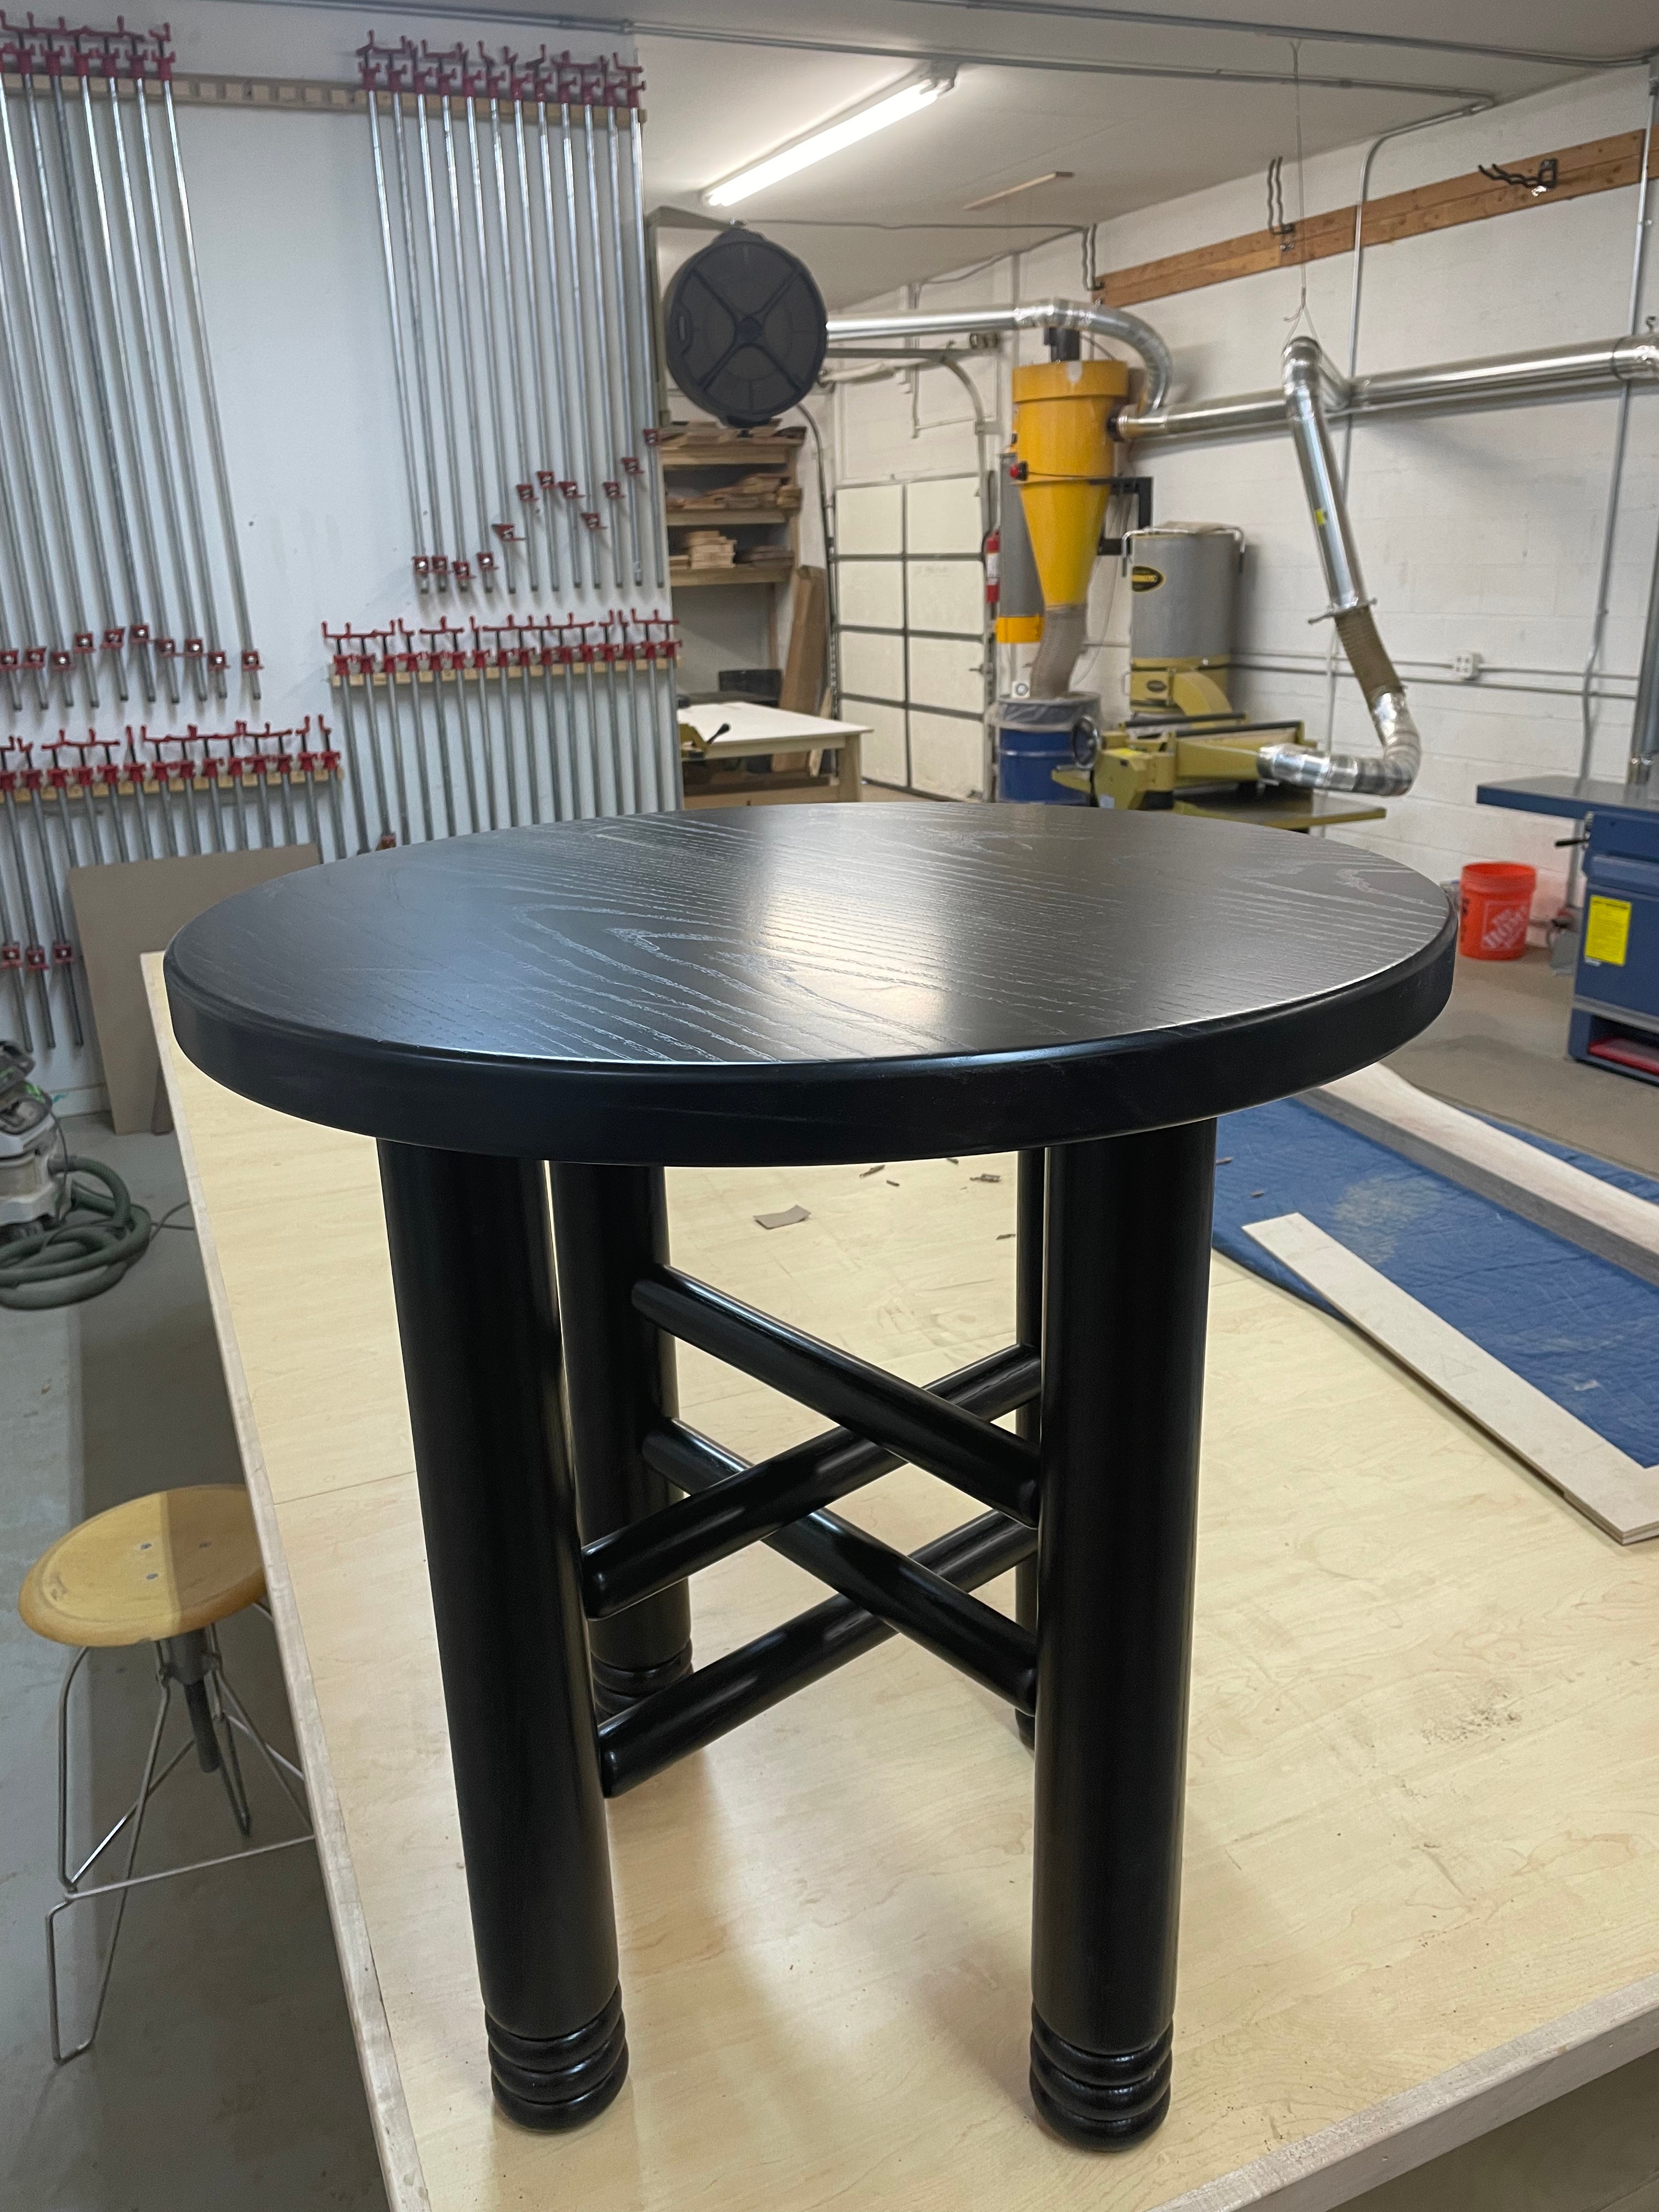 This cafe table in turned ash with a beaded leg detail is inspired by a cafe table I saw in France. The cross of the stretchers in the base is an unusual design element that creates visual complexity from simple traditional joinery. The bead details